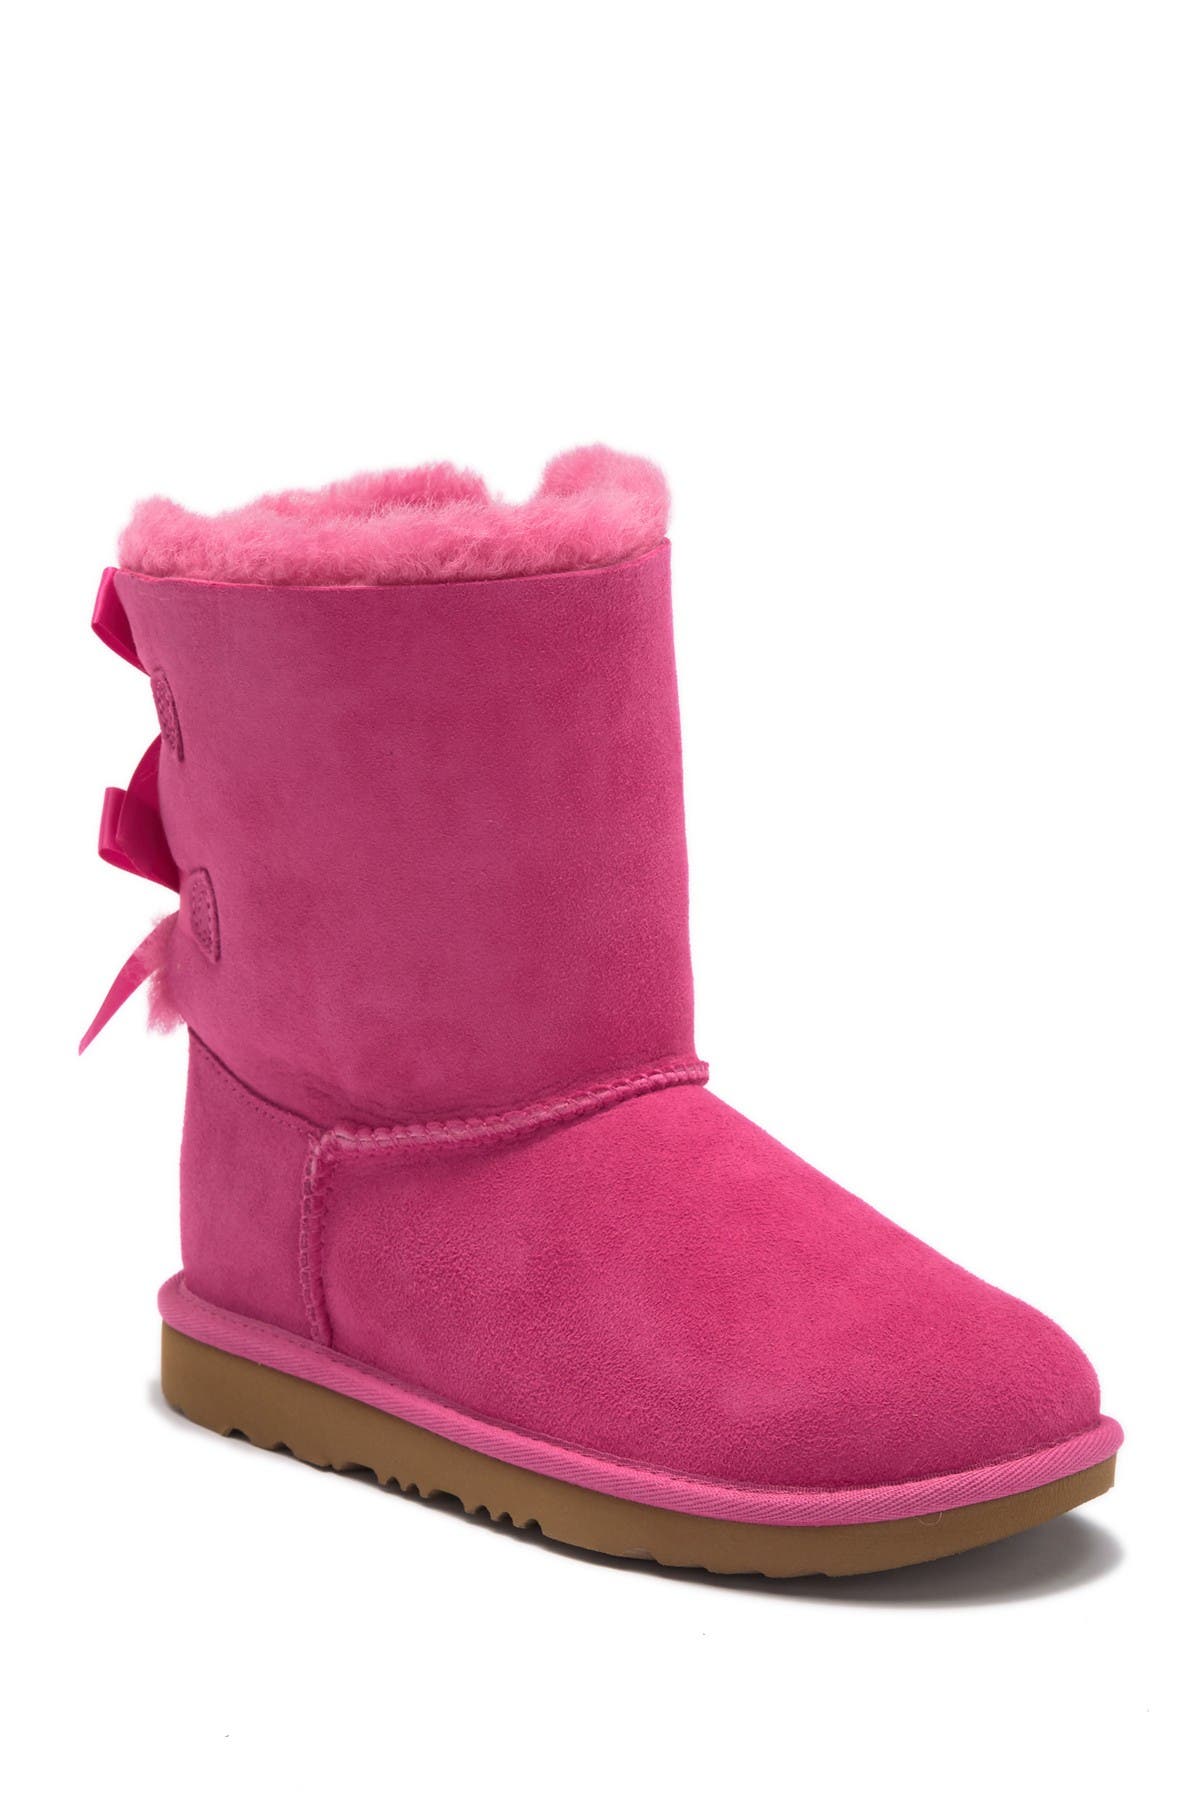 Ugg Kids' Pure Lined Boot In Paz